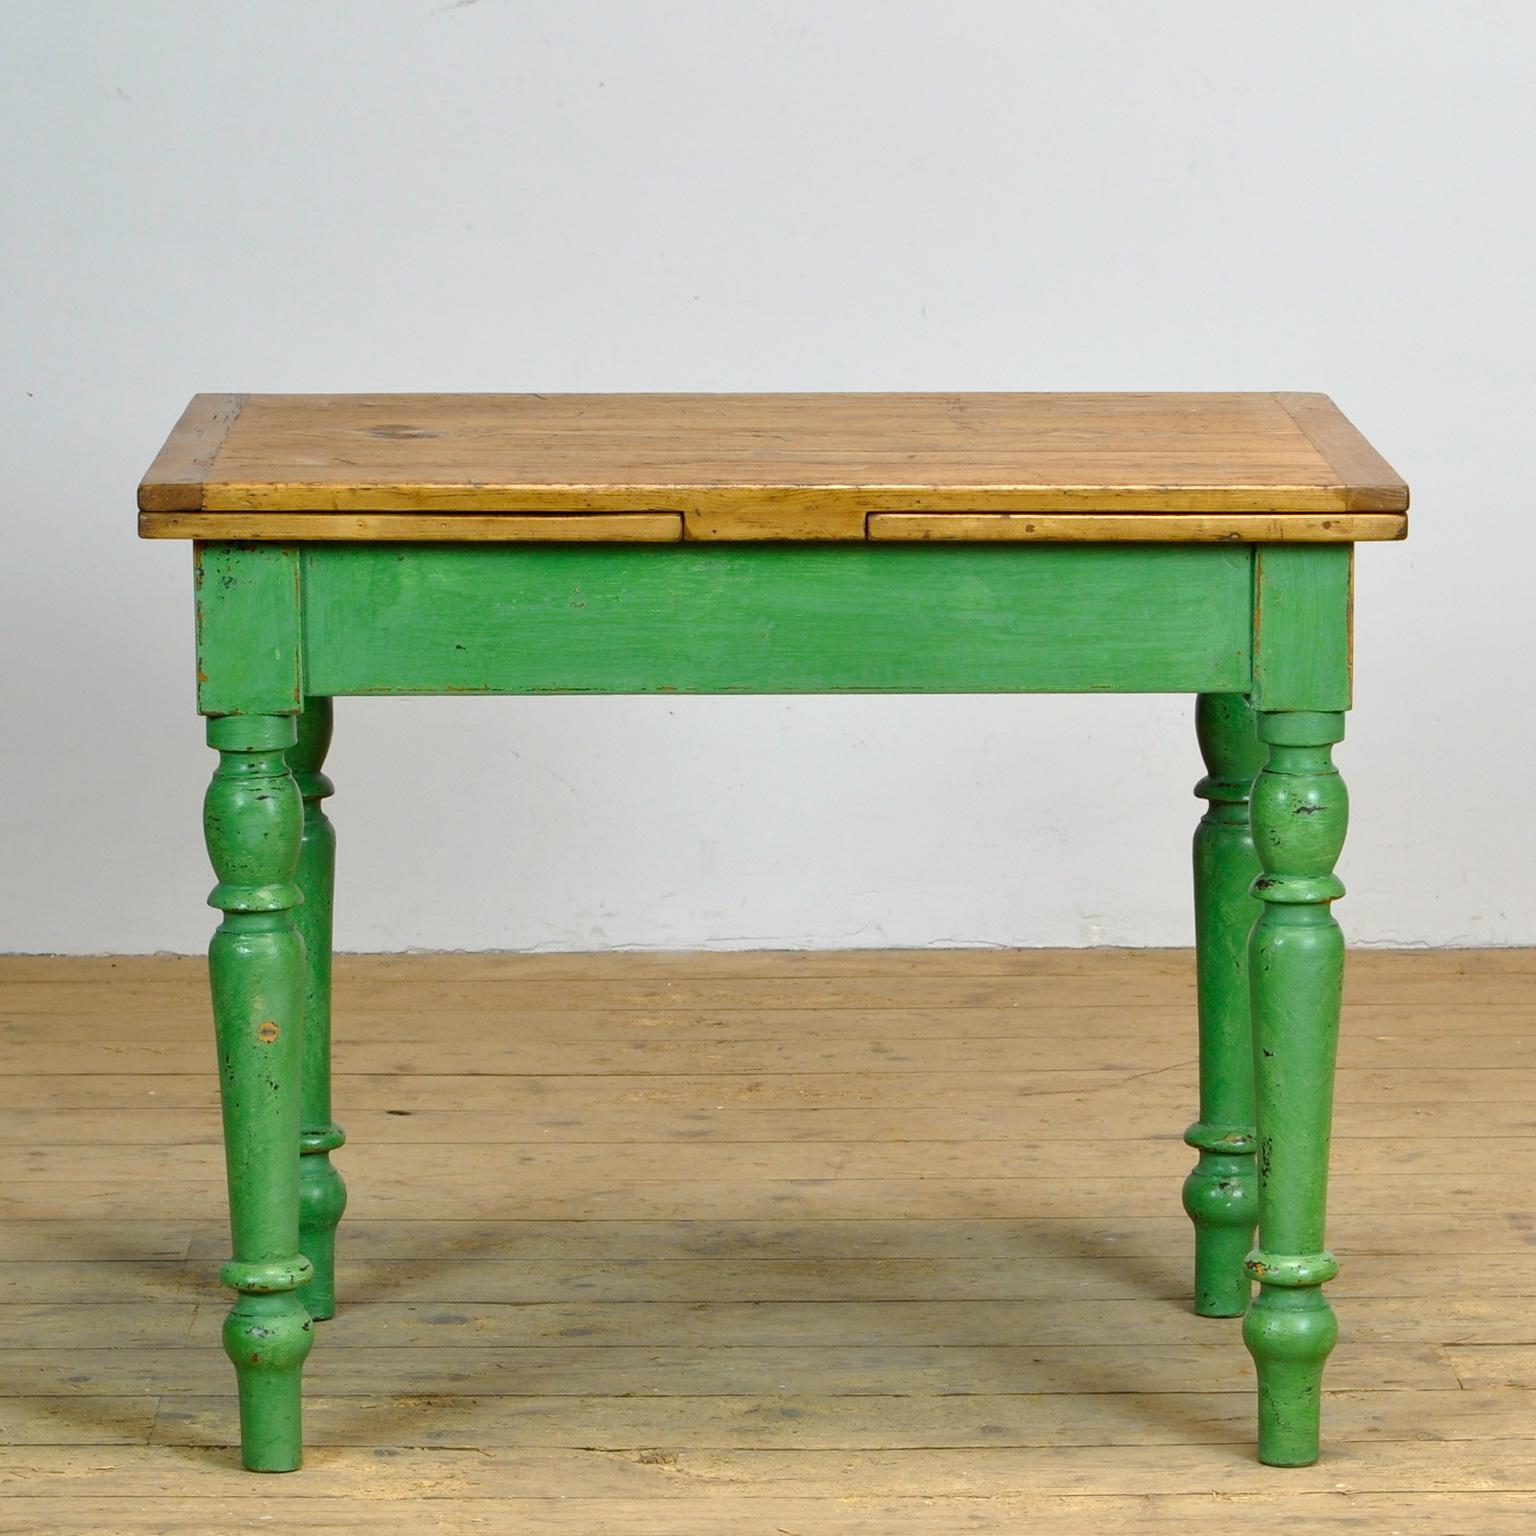 Pine table with extendable top. The table was made around 1930 and has its original green paint.
The Size of the top is 99 x 70 cm. 
The Size of the top extended is 184 x 70 cm.